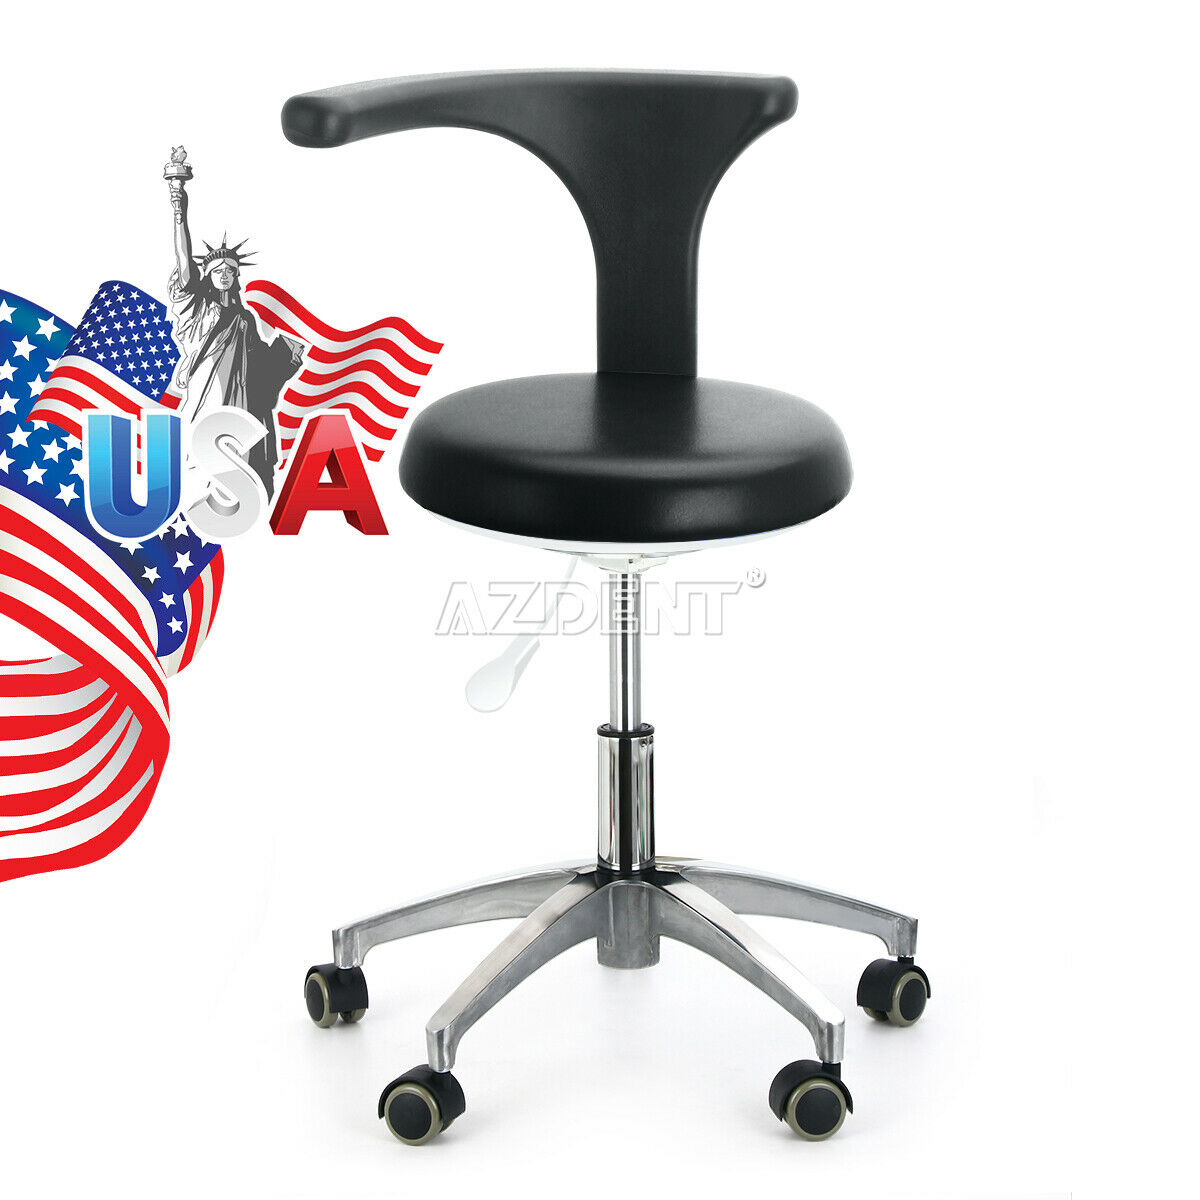 Dental Assistant Stool Adjustable Height Mobile Chair 360°rotation pu Leather Us